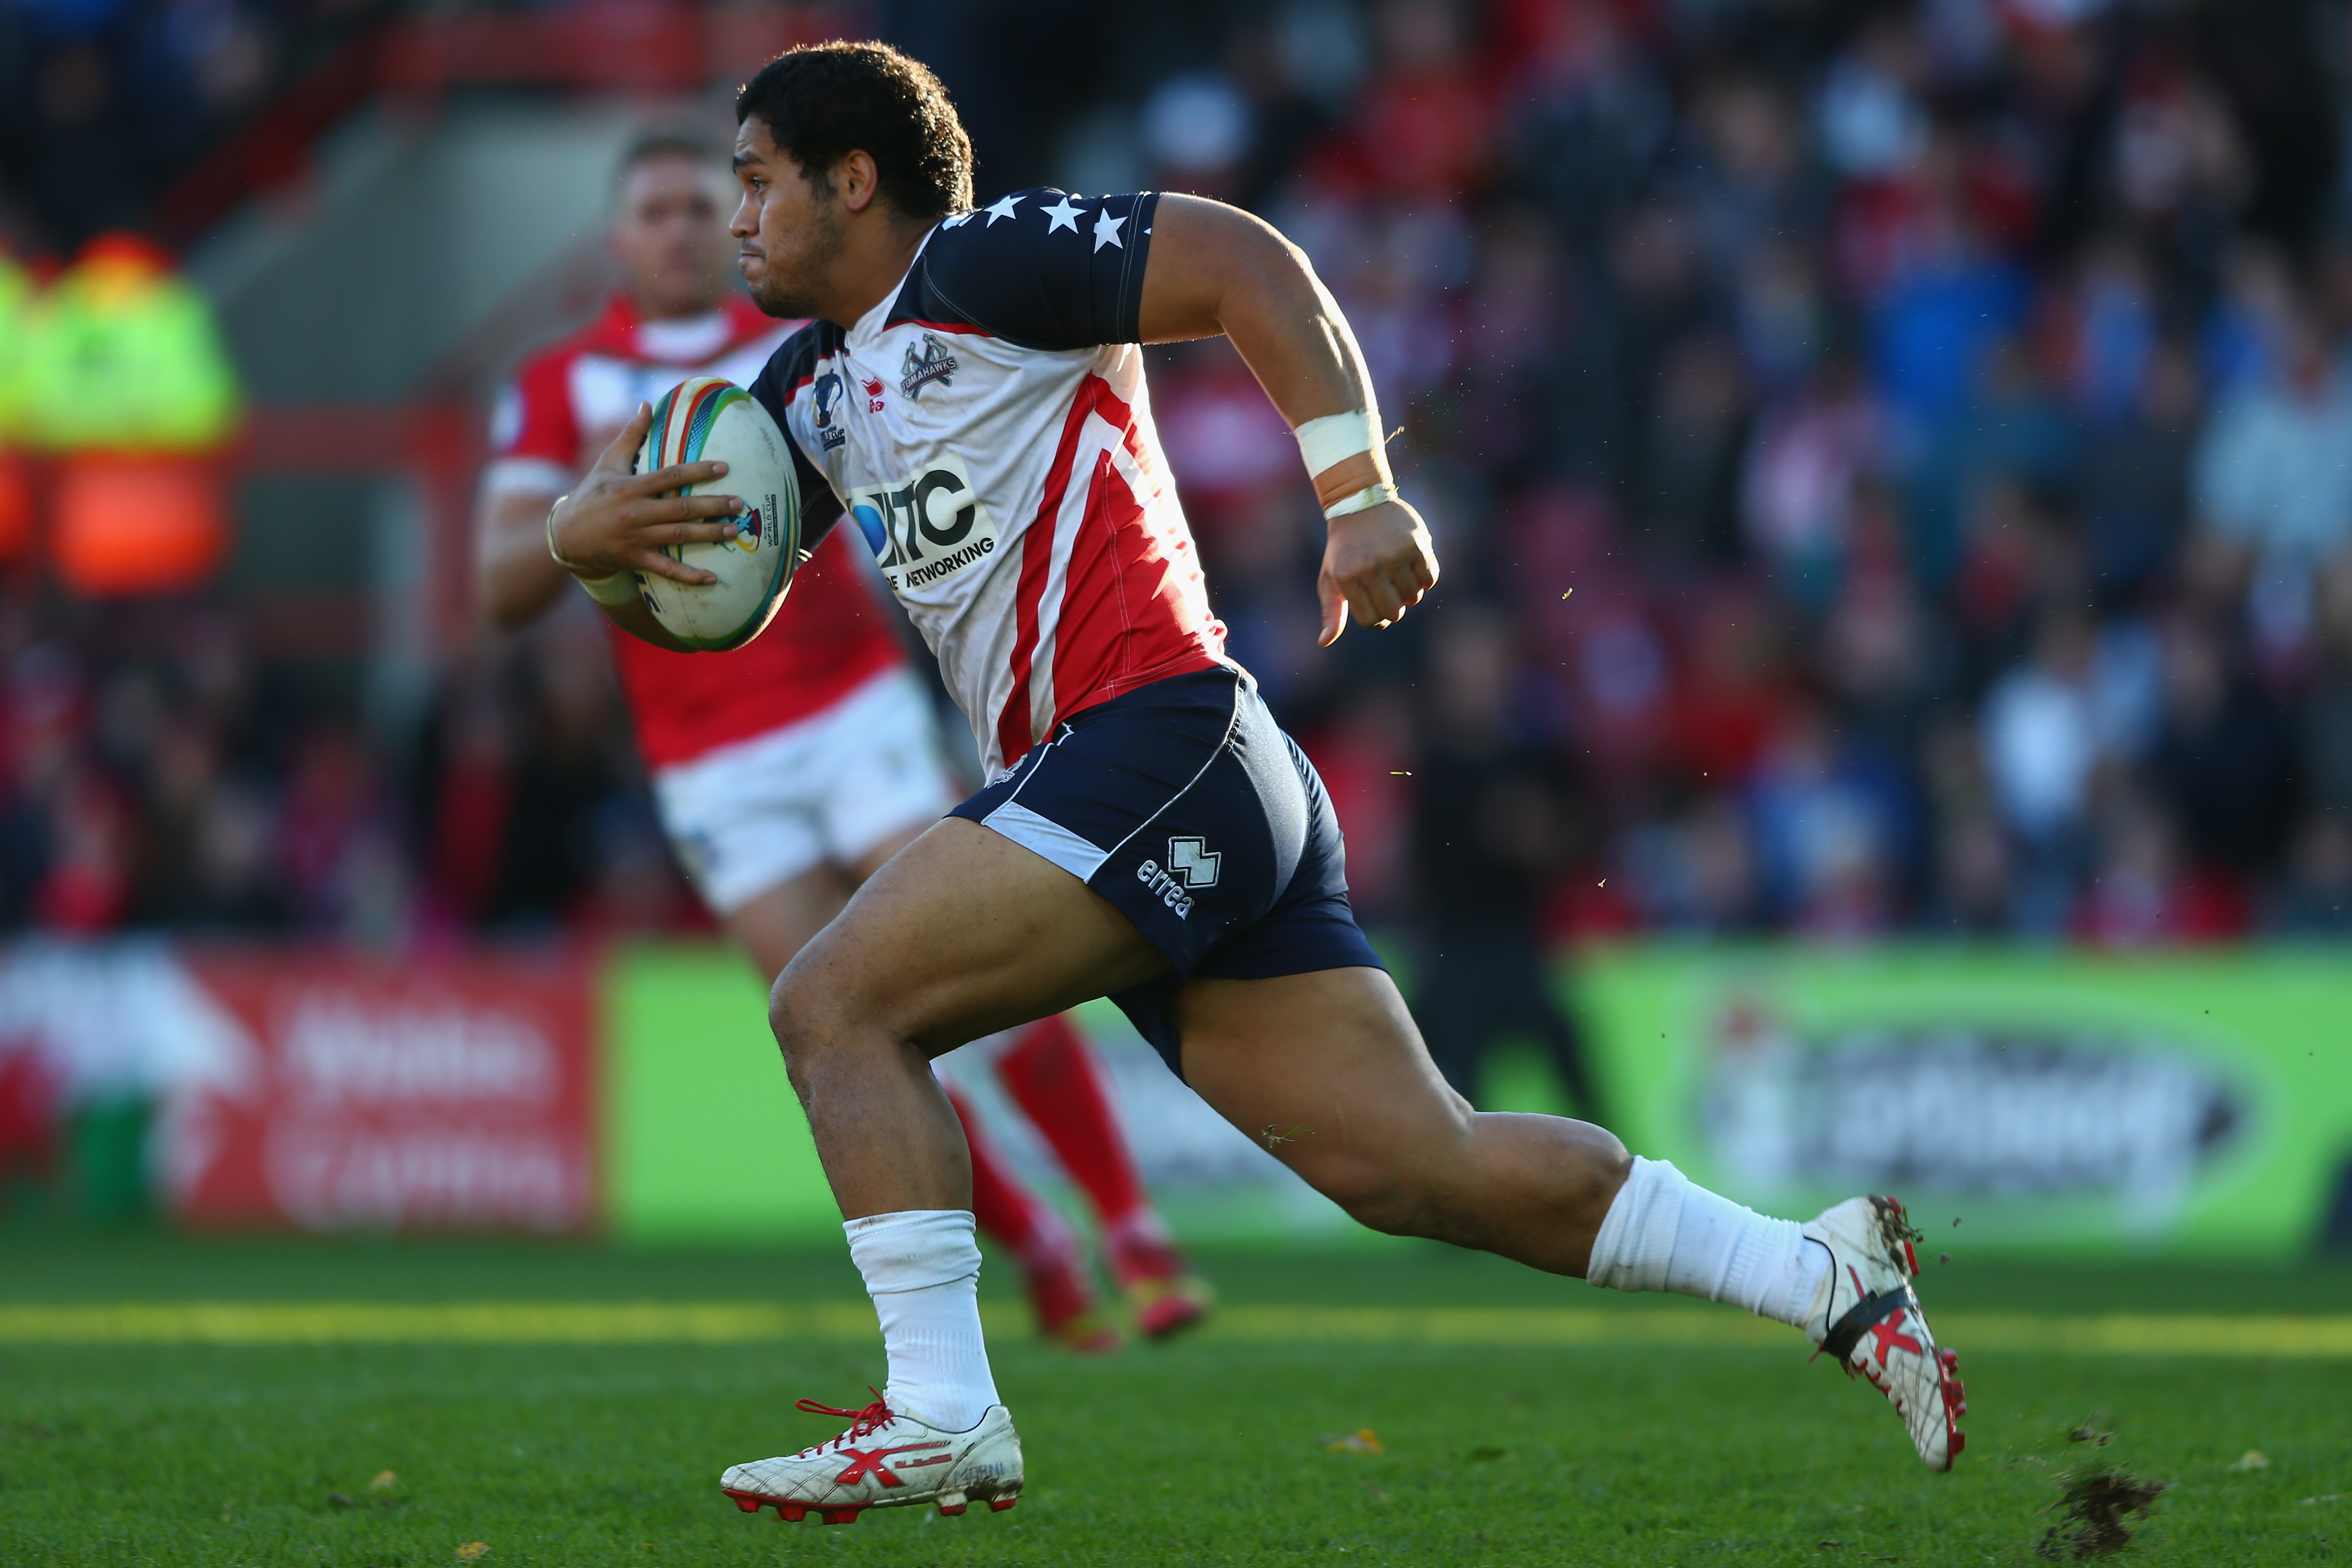 Faraimo and Pettybourne brothers in USA squad for Americas Championship